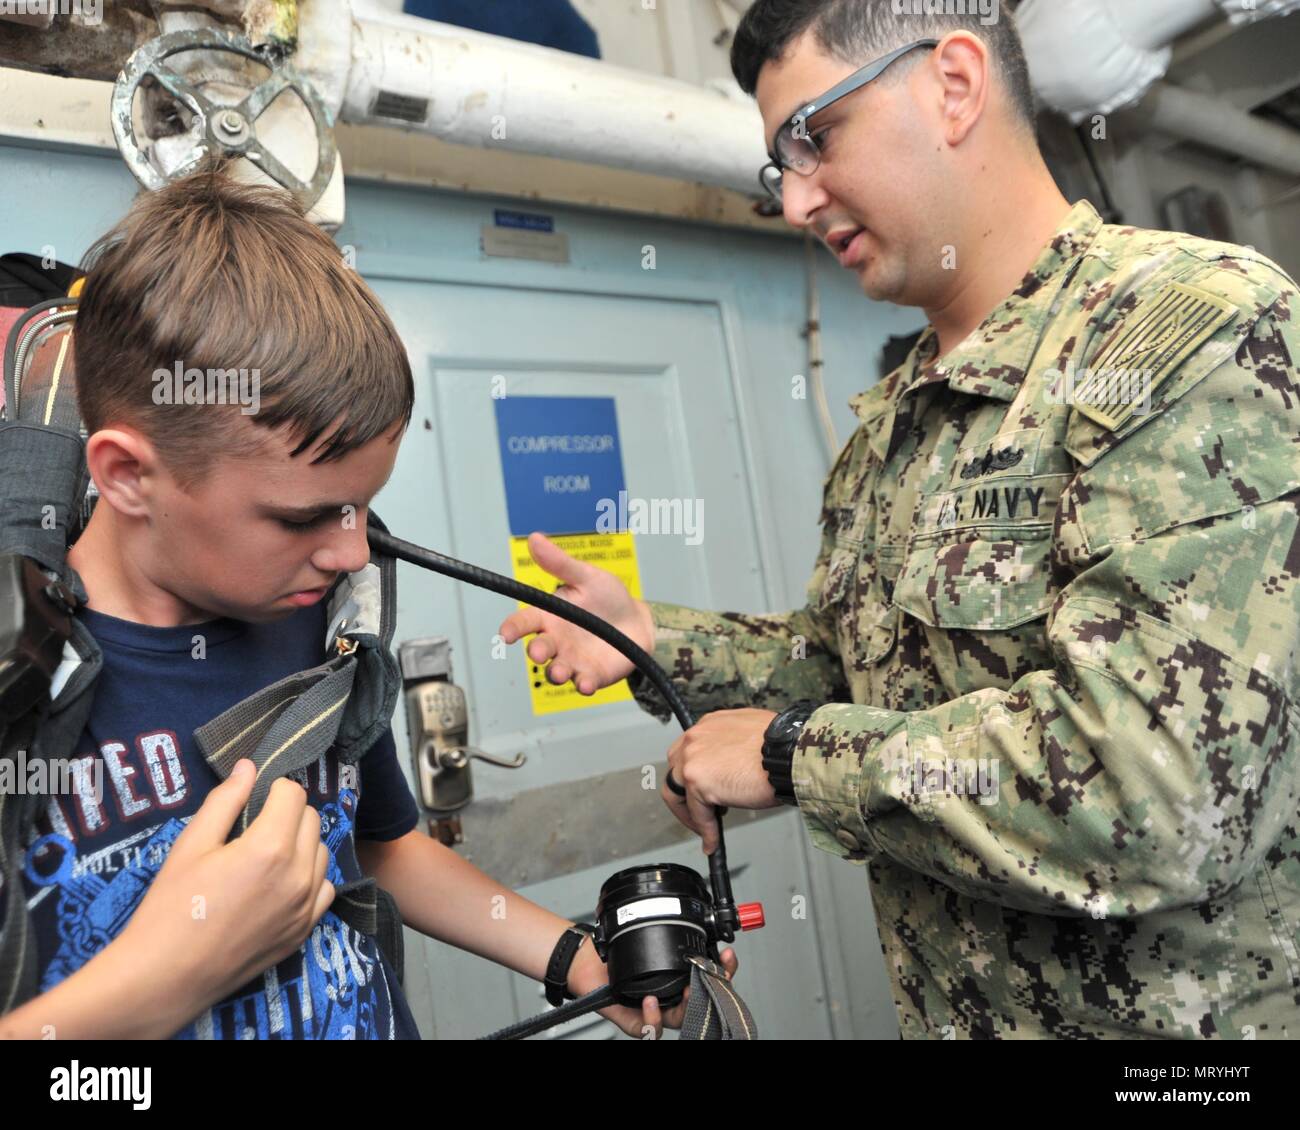 170714-N-YJ133-080 (POLARIS POINT, Guam) July 14, 2017 – Damage Controlman 3rd Class Felipe Zepeda helps a sea cadet from U.S. Naval Sea Cadet Corps Marianas Division Guam don a Self-Contained Breathing Apparatus (SCBA) during a tour of submarine tender USS Emory S. Land (AS 39), July 14. Land and USS Frank Cable (AS 40), the U.S. Navy’s only two submarine tenders, both homeported in Apra Harbor, Guam, provide maintenance, hotel services and logistical support to submarines and surface ships in the U.S. 5th and 7th Fleet areas of operation. (U.S. Navy photo by Mass Communication Specialist 2nd Stock Photo